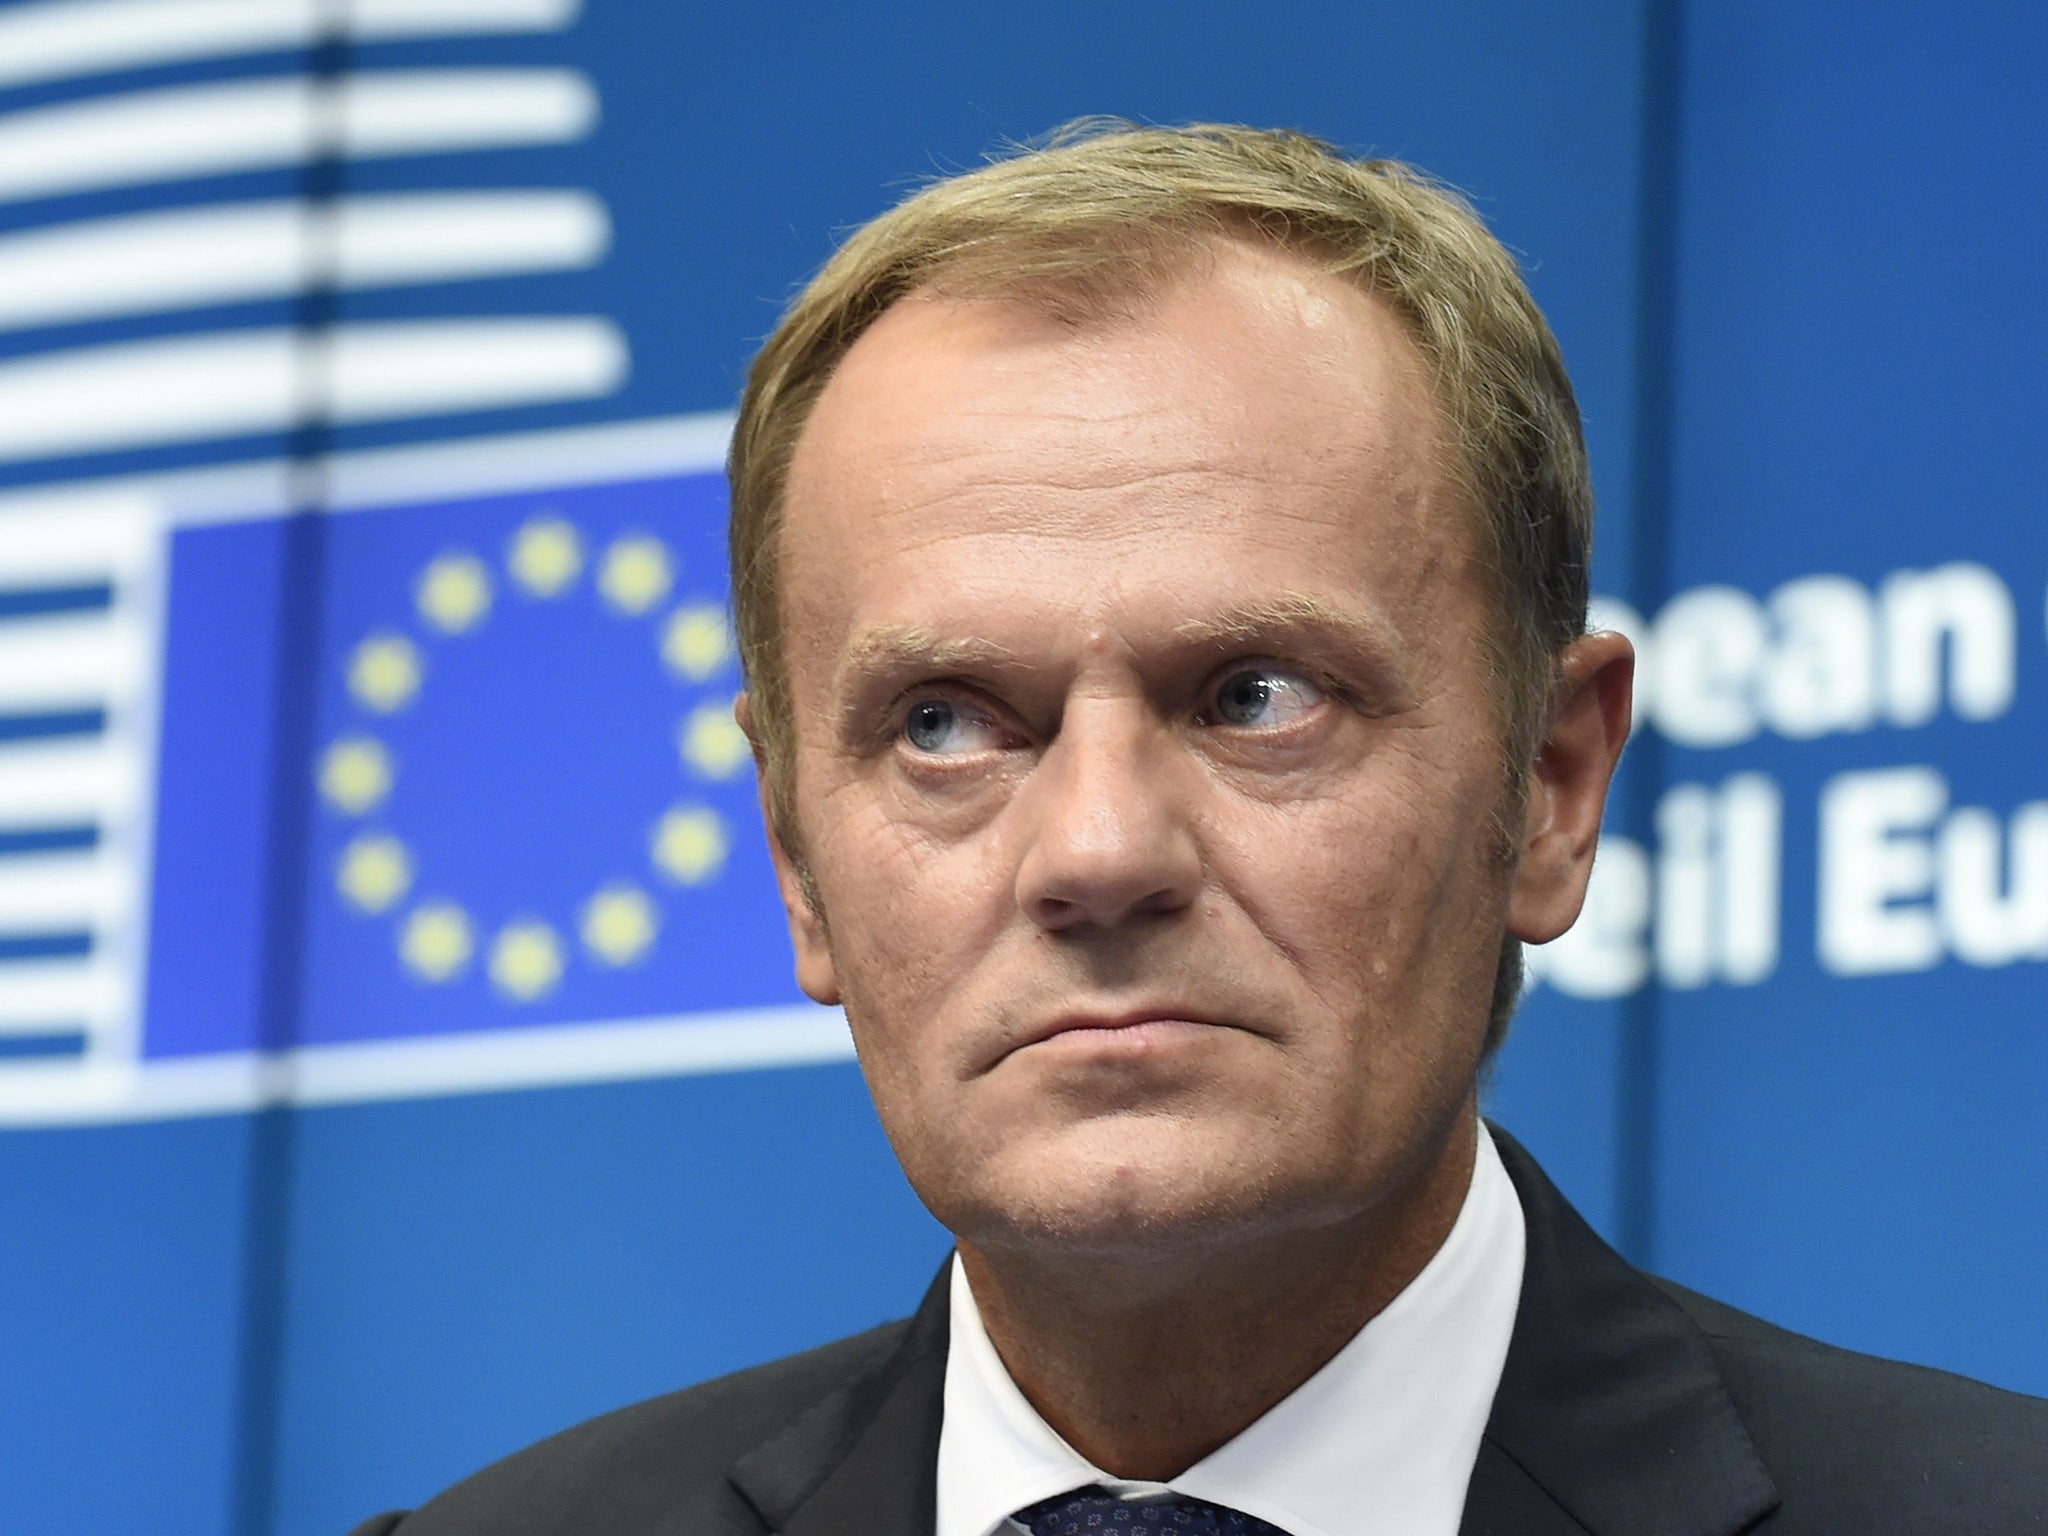 President of the European Council Donald Tusk announced the voluntary deal in the early hours of Friday